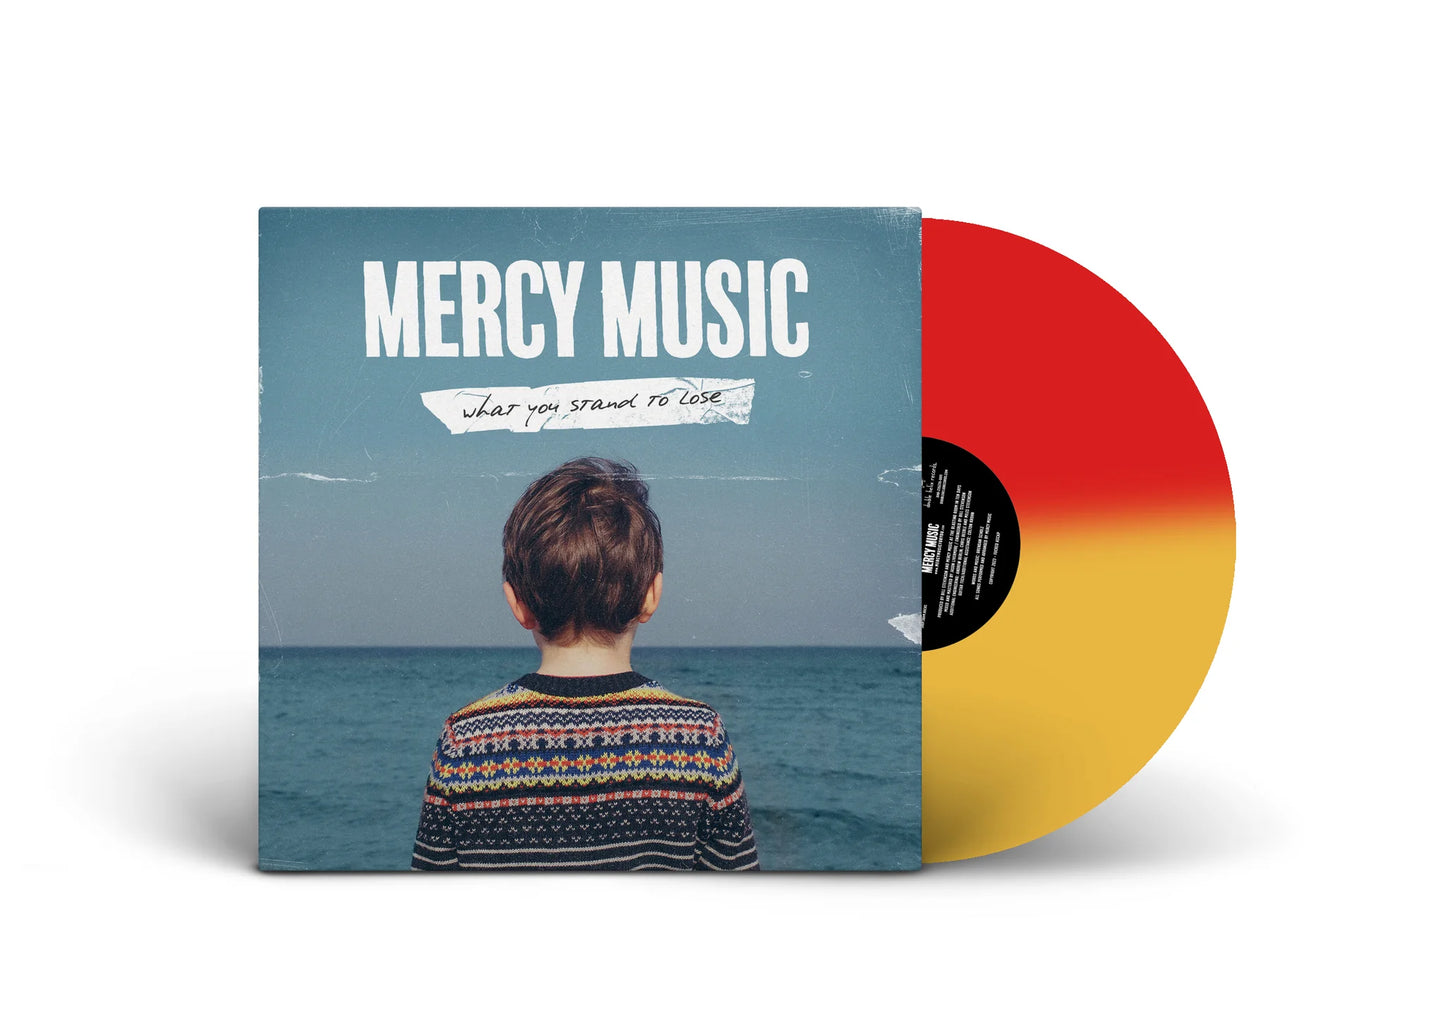 MERCY MUSIC - "What You Stand To Lose" (SBAM) (LP)